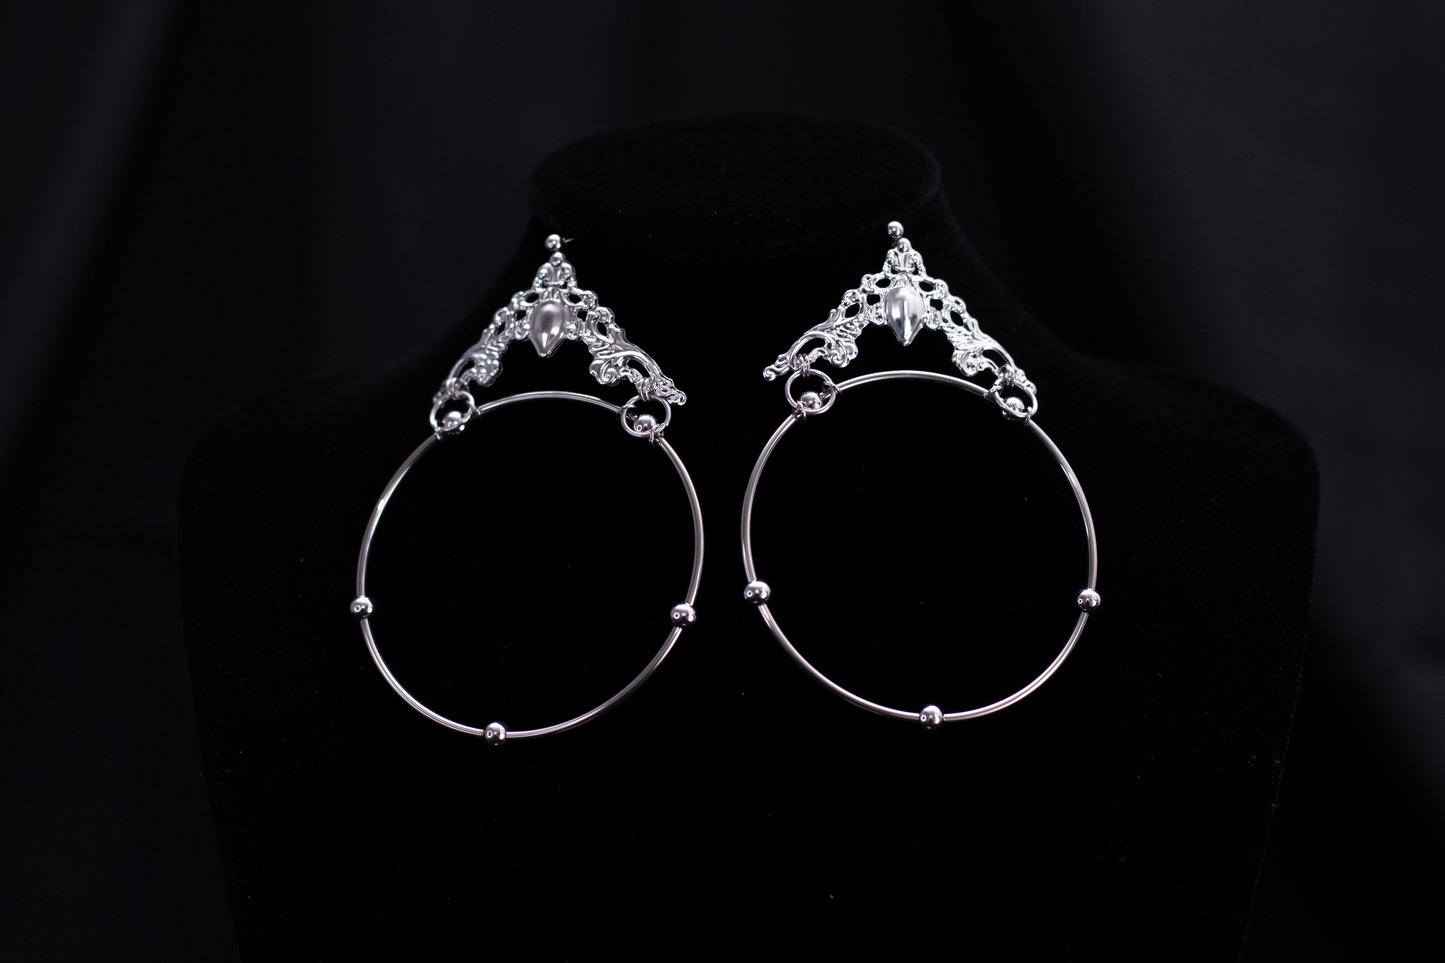 A pair of Myril Jewels' bold gothic hoop earrings featuring an expansive design and ornate details. These hoops combine classic elegance with neo-gothic flair, making them an ideal gift for those who love a statement piece. Their unique style suits various occasions, from Halloween to everyday wear, reflecting the dark, avant-garde aesthetic of the Myril Jewels brand.